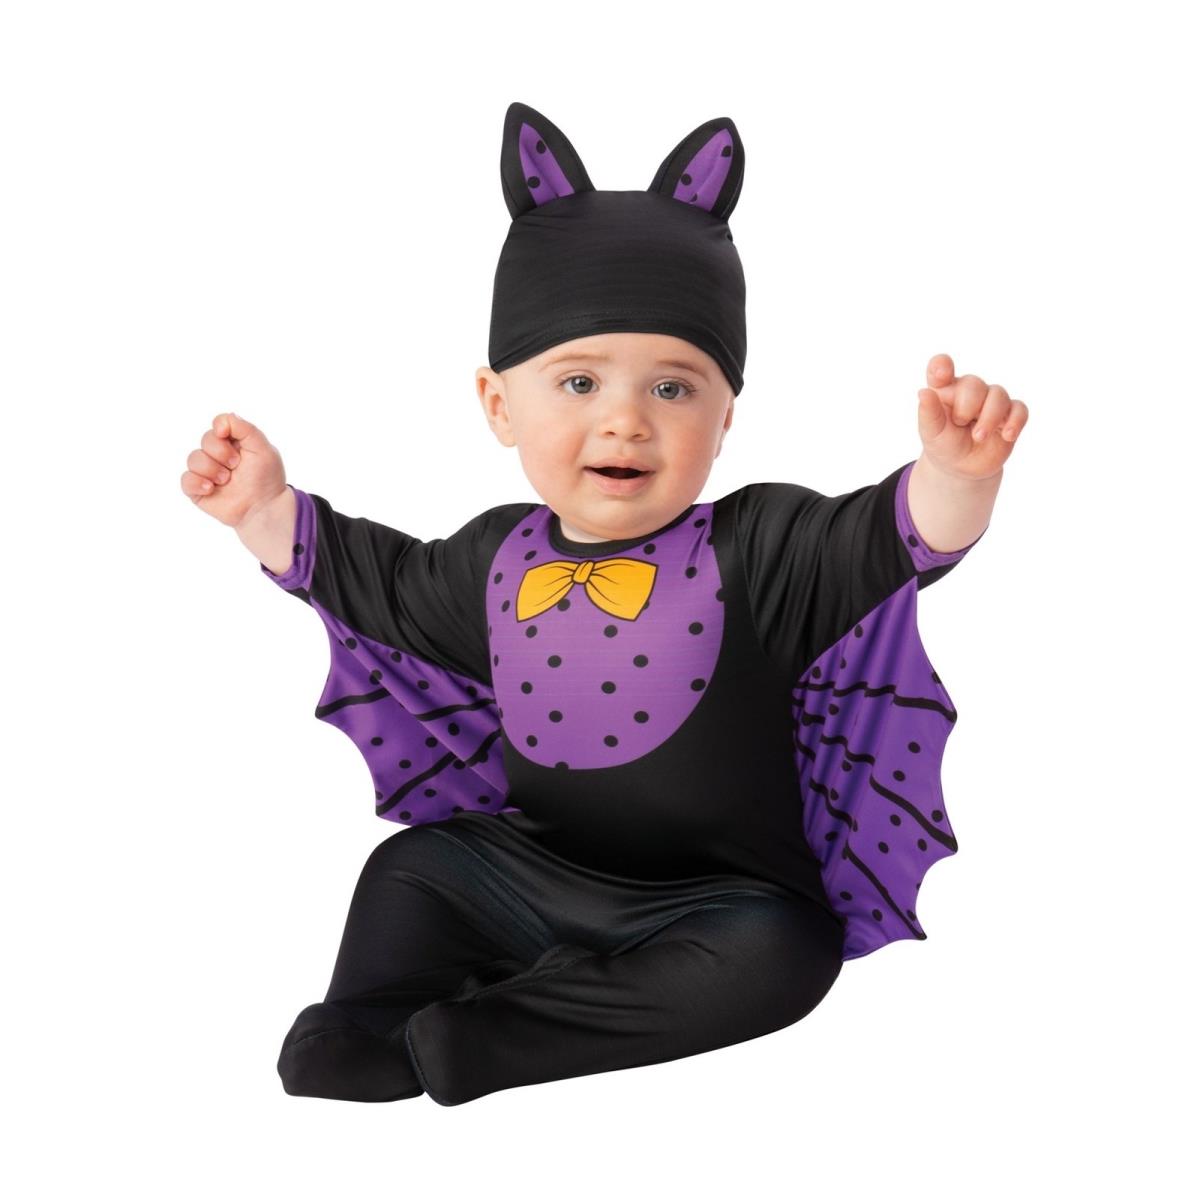 Picture of Rubies 405602 Little Bat Infant & Toddler Costume - Toddler